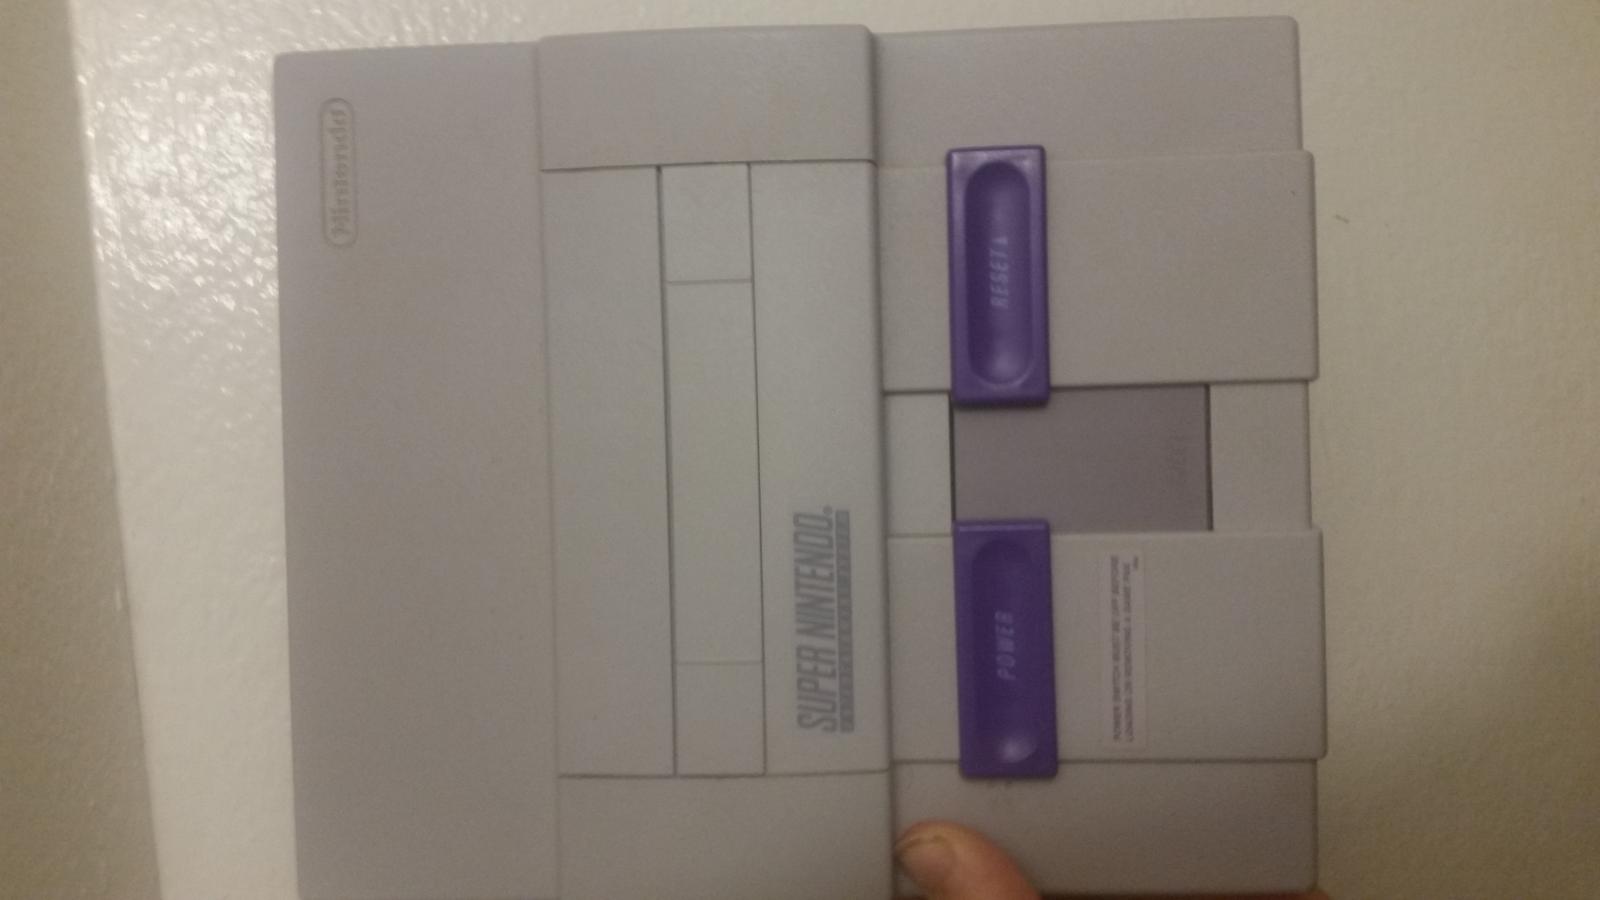 For sale SNES 1CHIP + HD Retrovision Component Cable